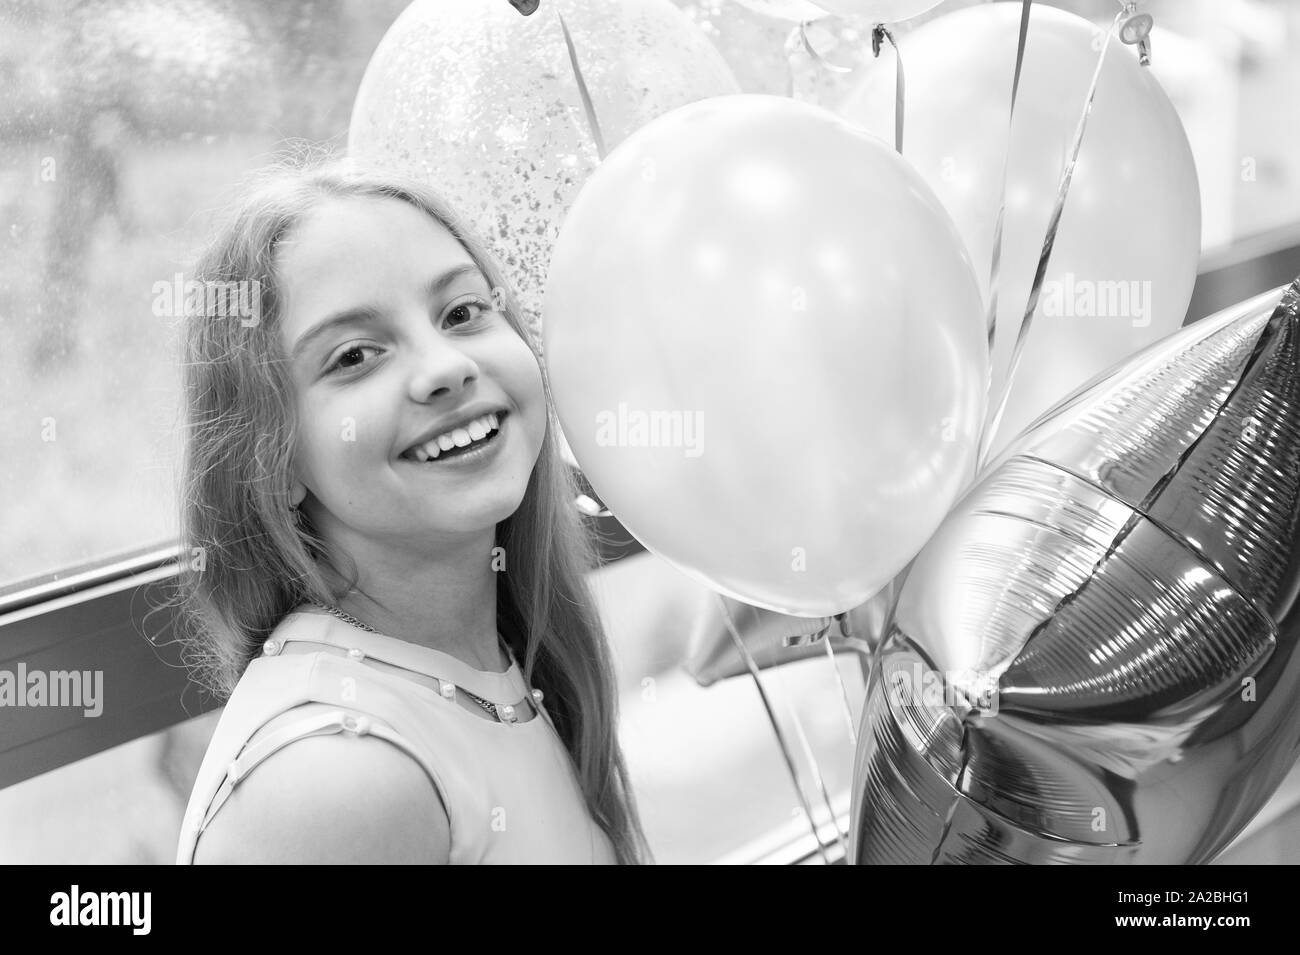 Helium Balloons Decorations Black And White Stock Photos Images Alamy,How To Design A Kitchen Layout